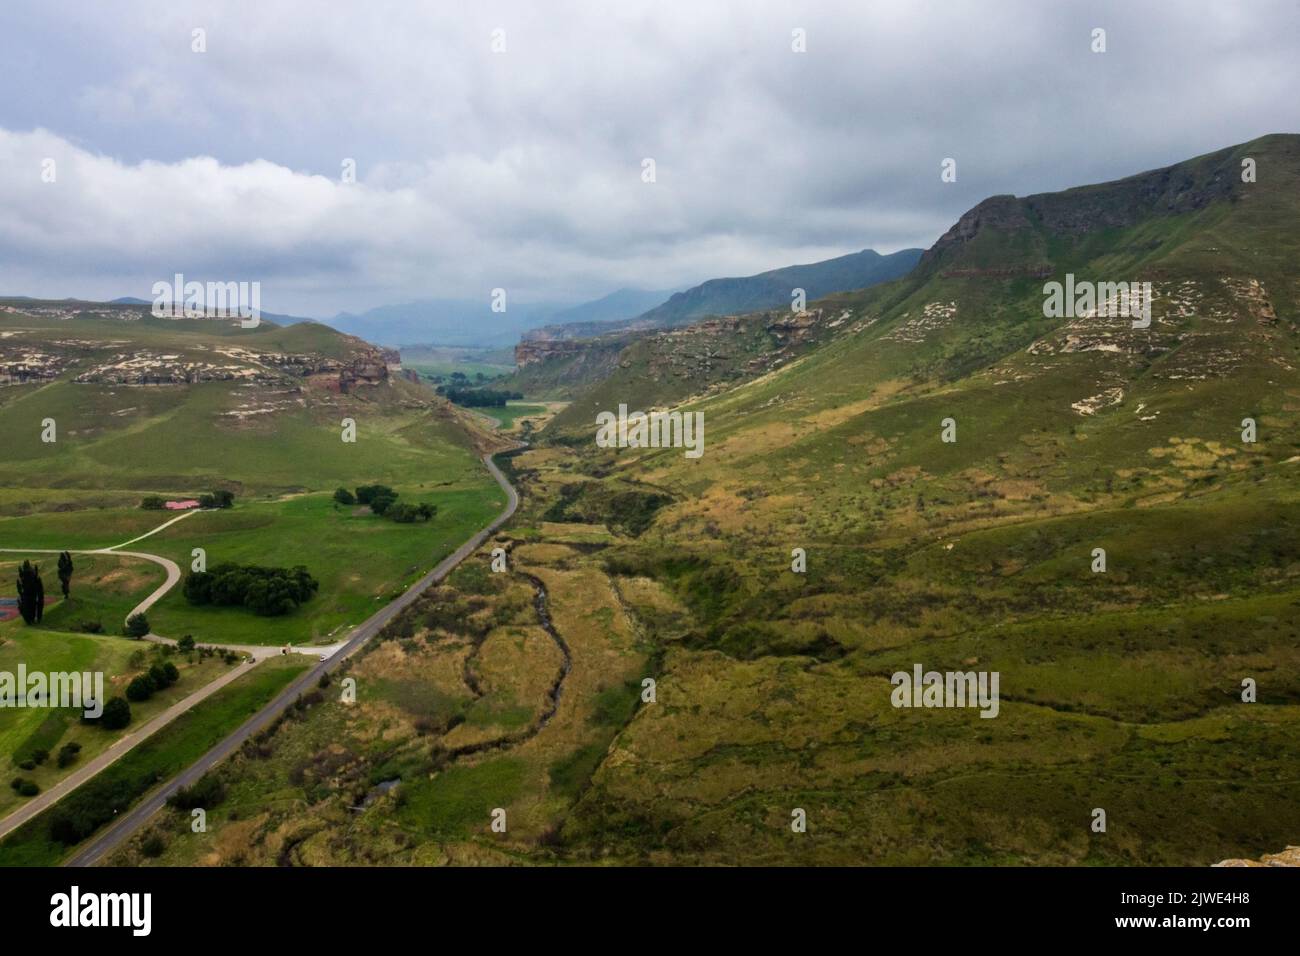 View over the highway cutting through a valley in the Free State Drakensberg Mountains of South Africa, with a storm gathering overhead Stock Photo